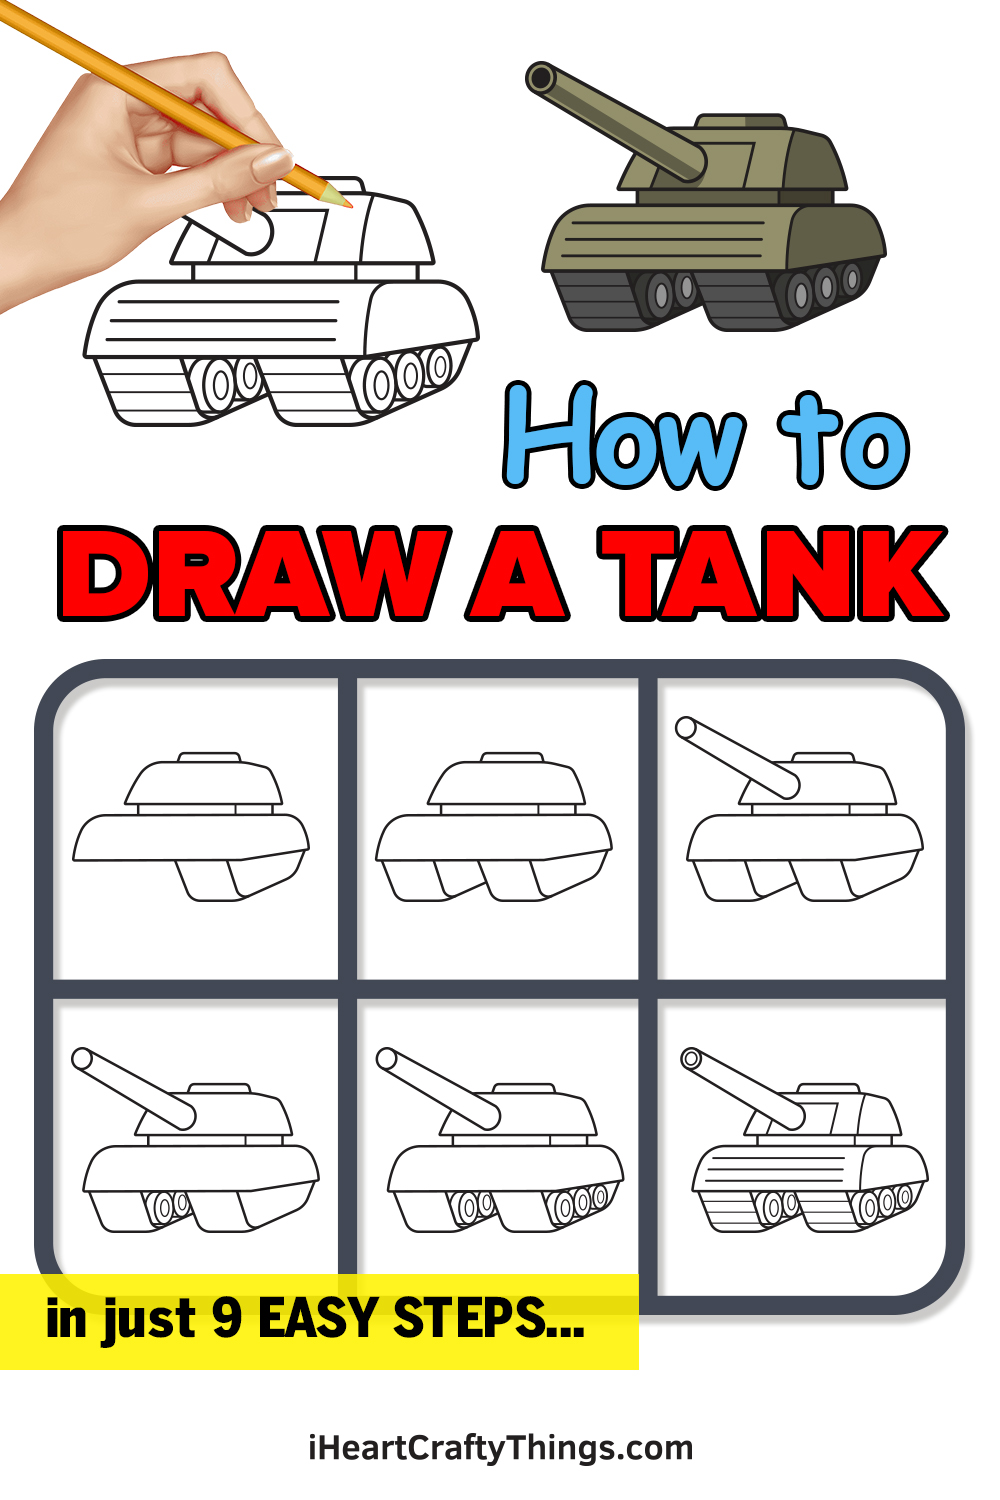 how to draw a tank in 9 easy steps